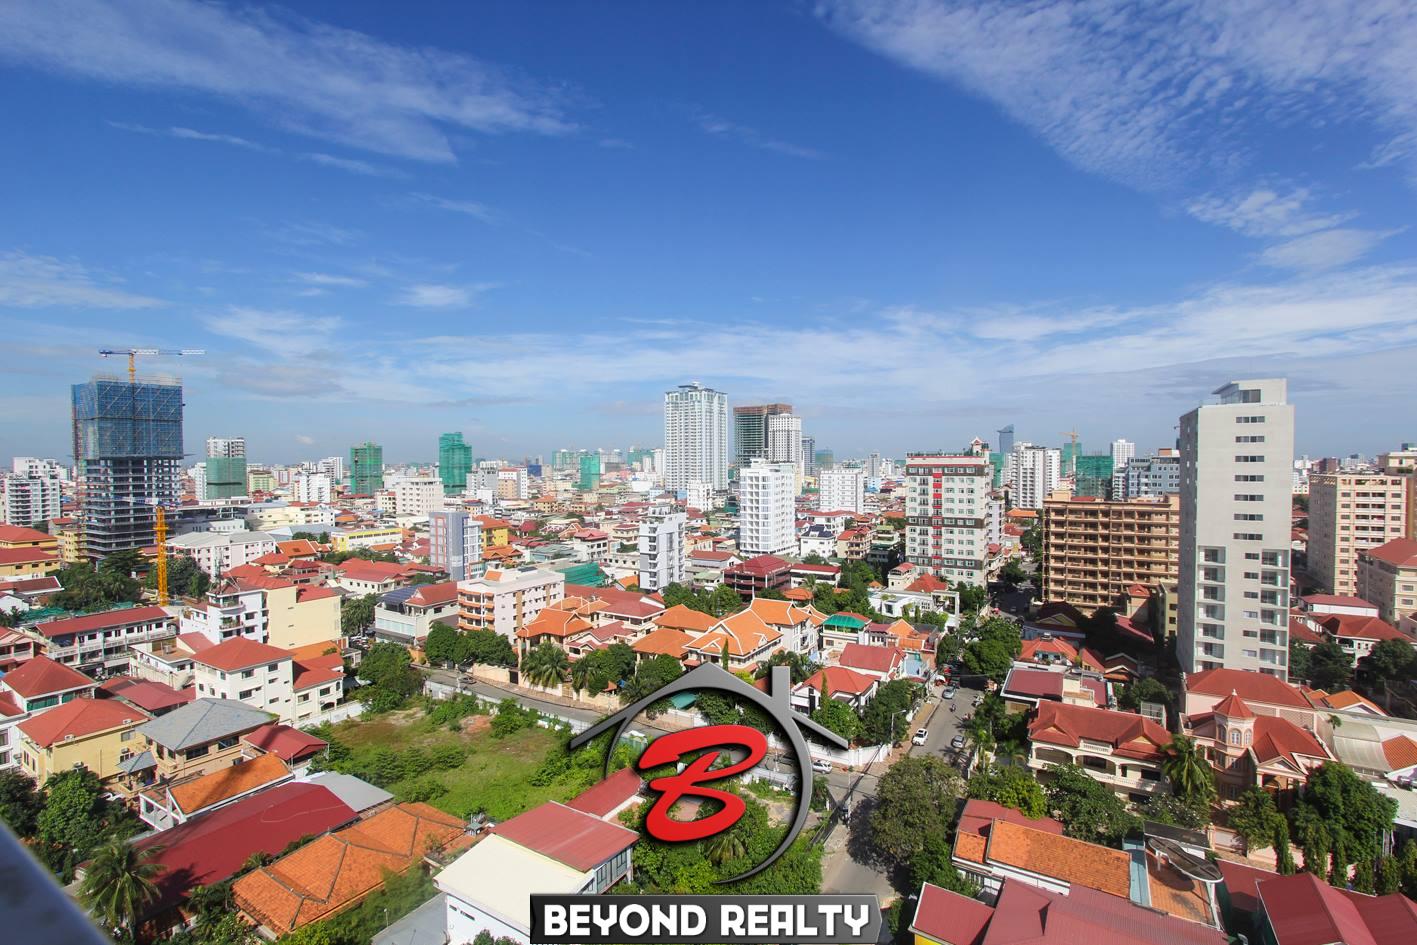 the view from the terrace of the apartment in which 1-bedroom luxury spacious serviced apartment for rent in BKK1 in Phnom Penh in Cambodia is located